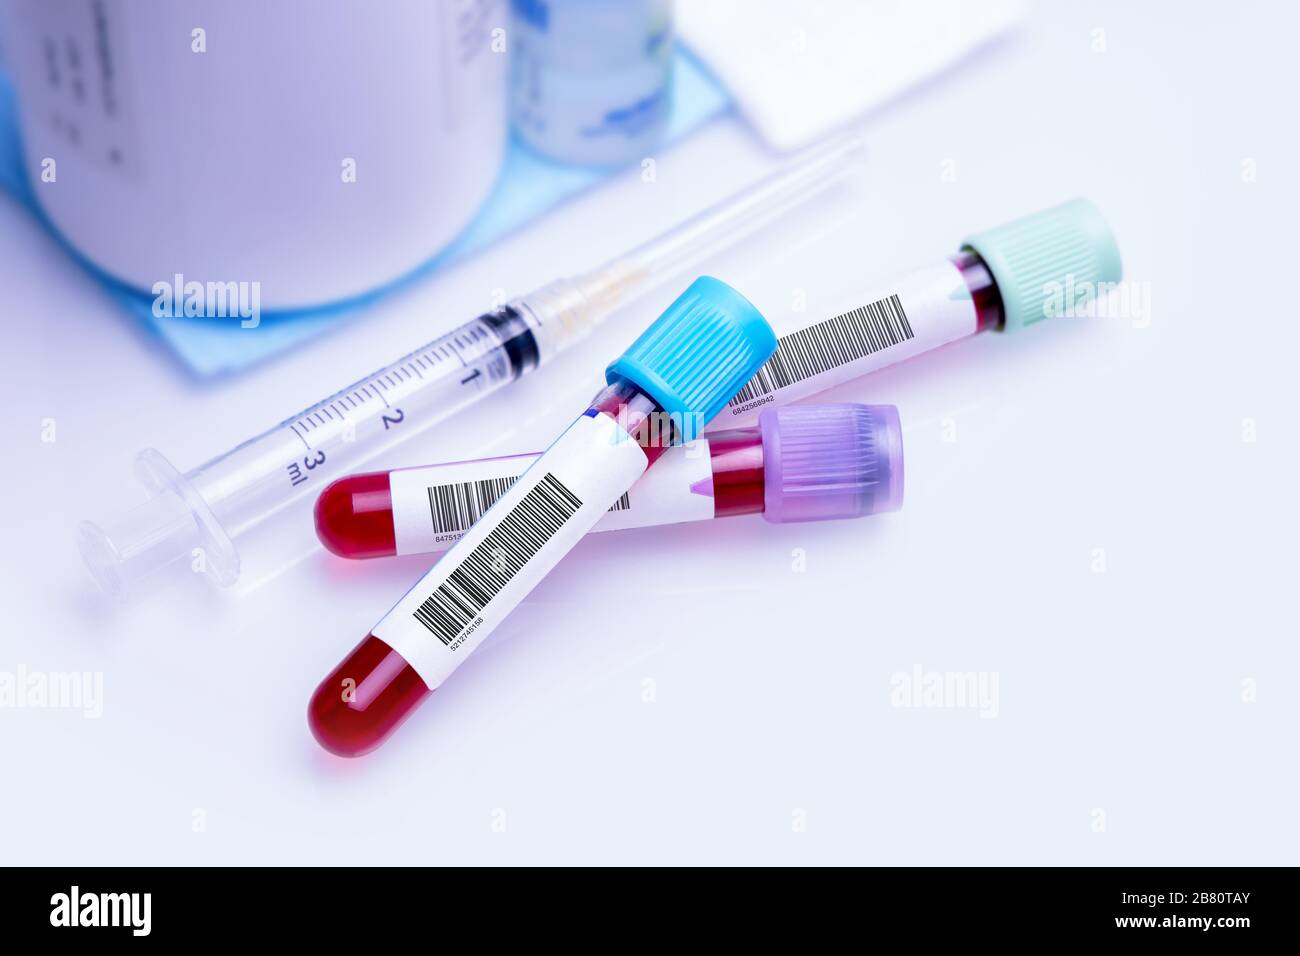 Blood donation for immune substances research against Coronavirus. Conceptual image for World blood donor day June 14. Stock Photo